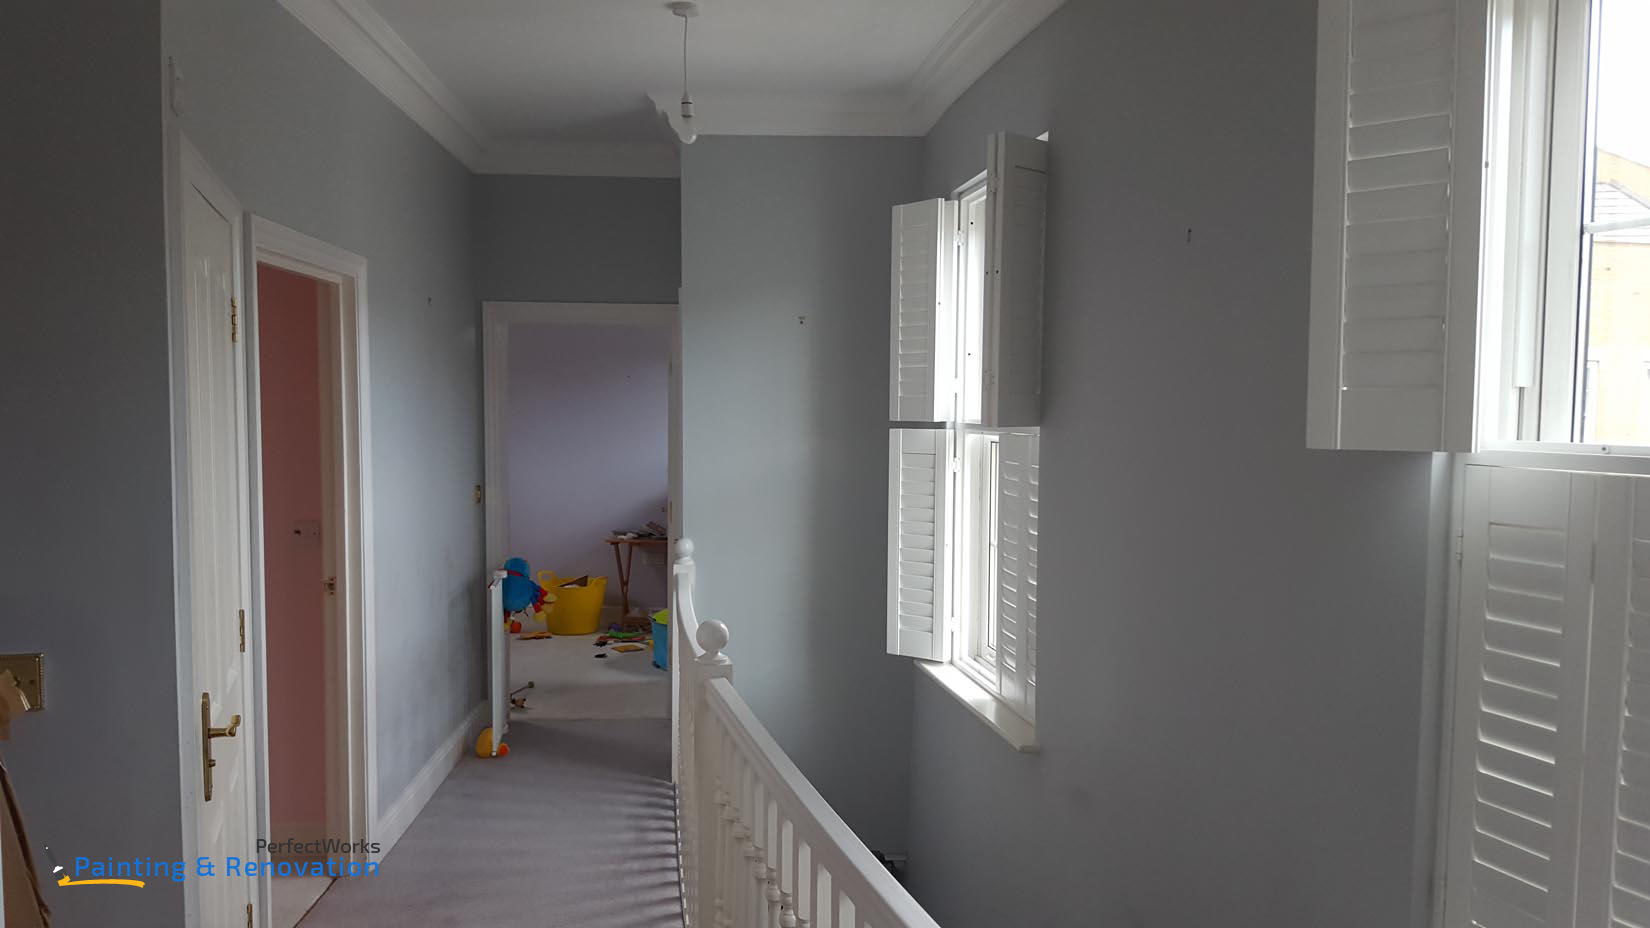 Exterior and Interior Painting Services